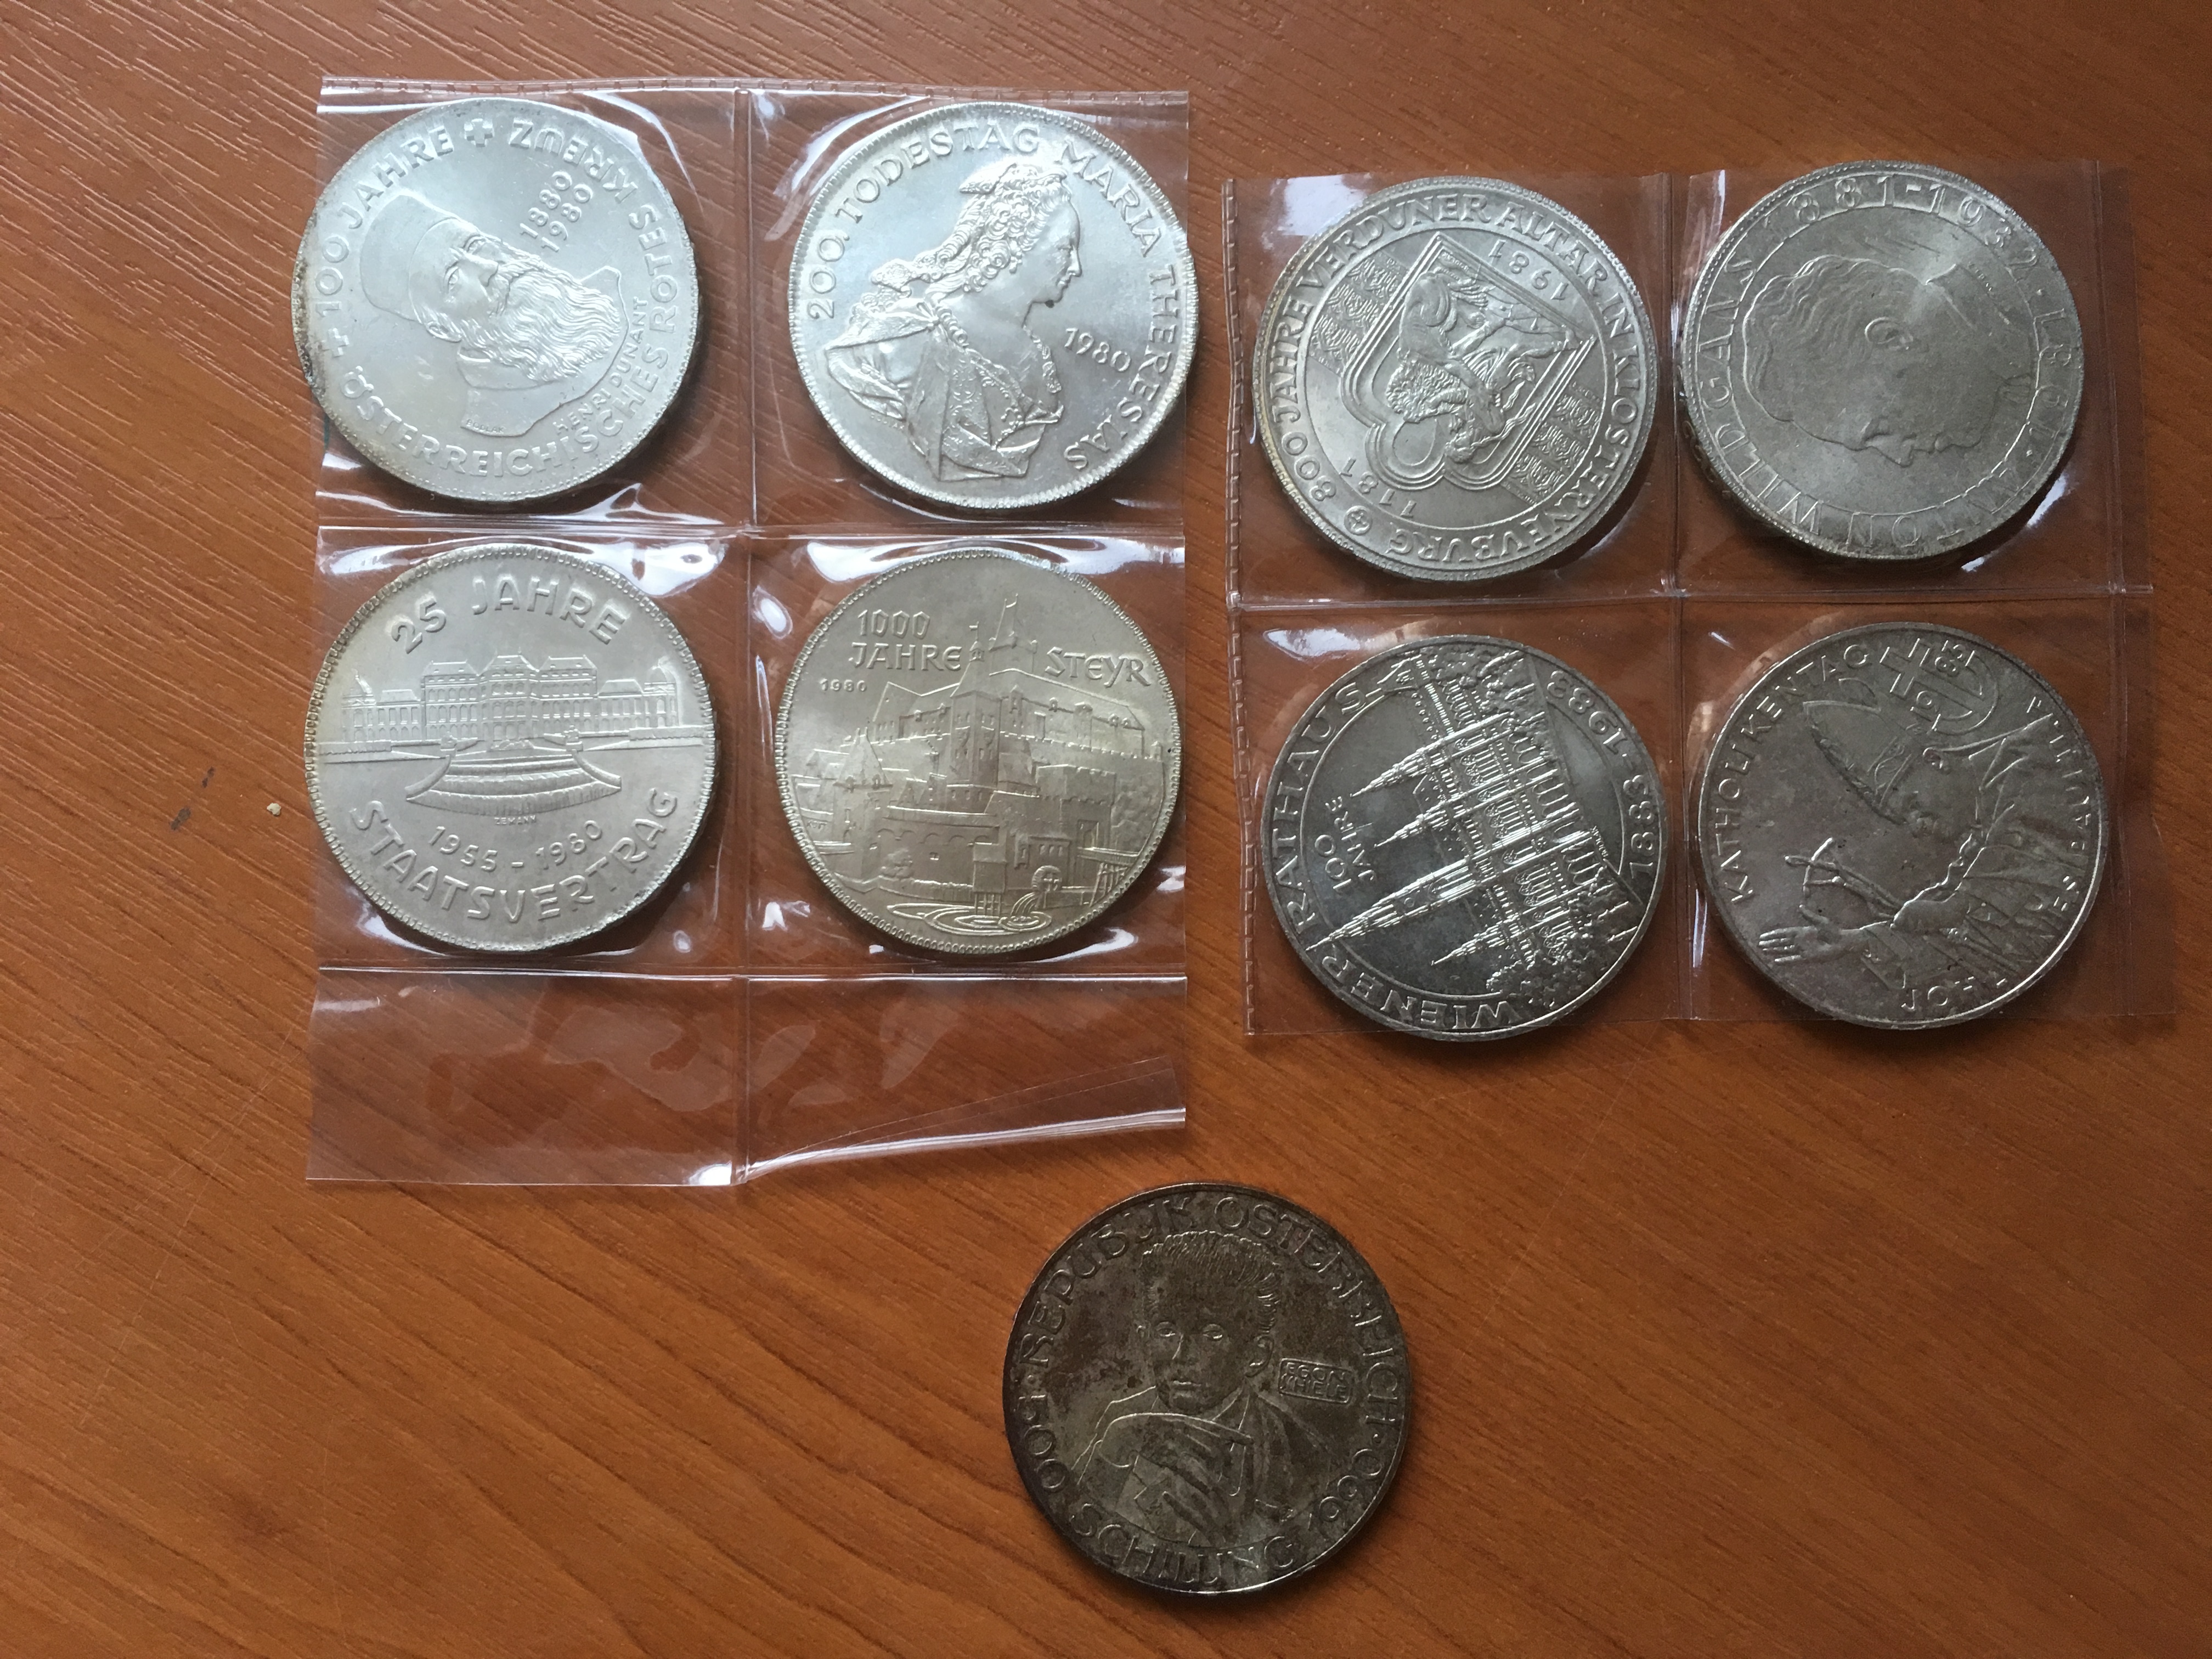 AUSTRIA: c1982-89 COLLECTION OF 500 SCHILLING SILVER COMMEMORATIVE COINS, - Image 4 of 6